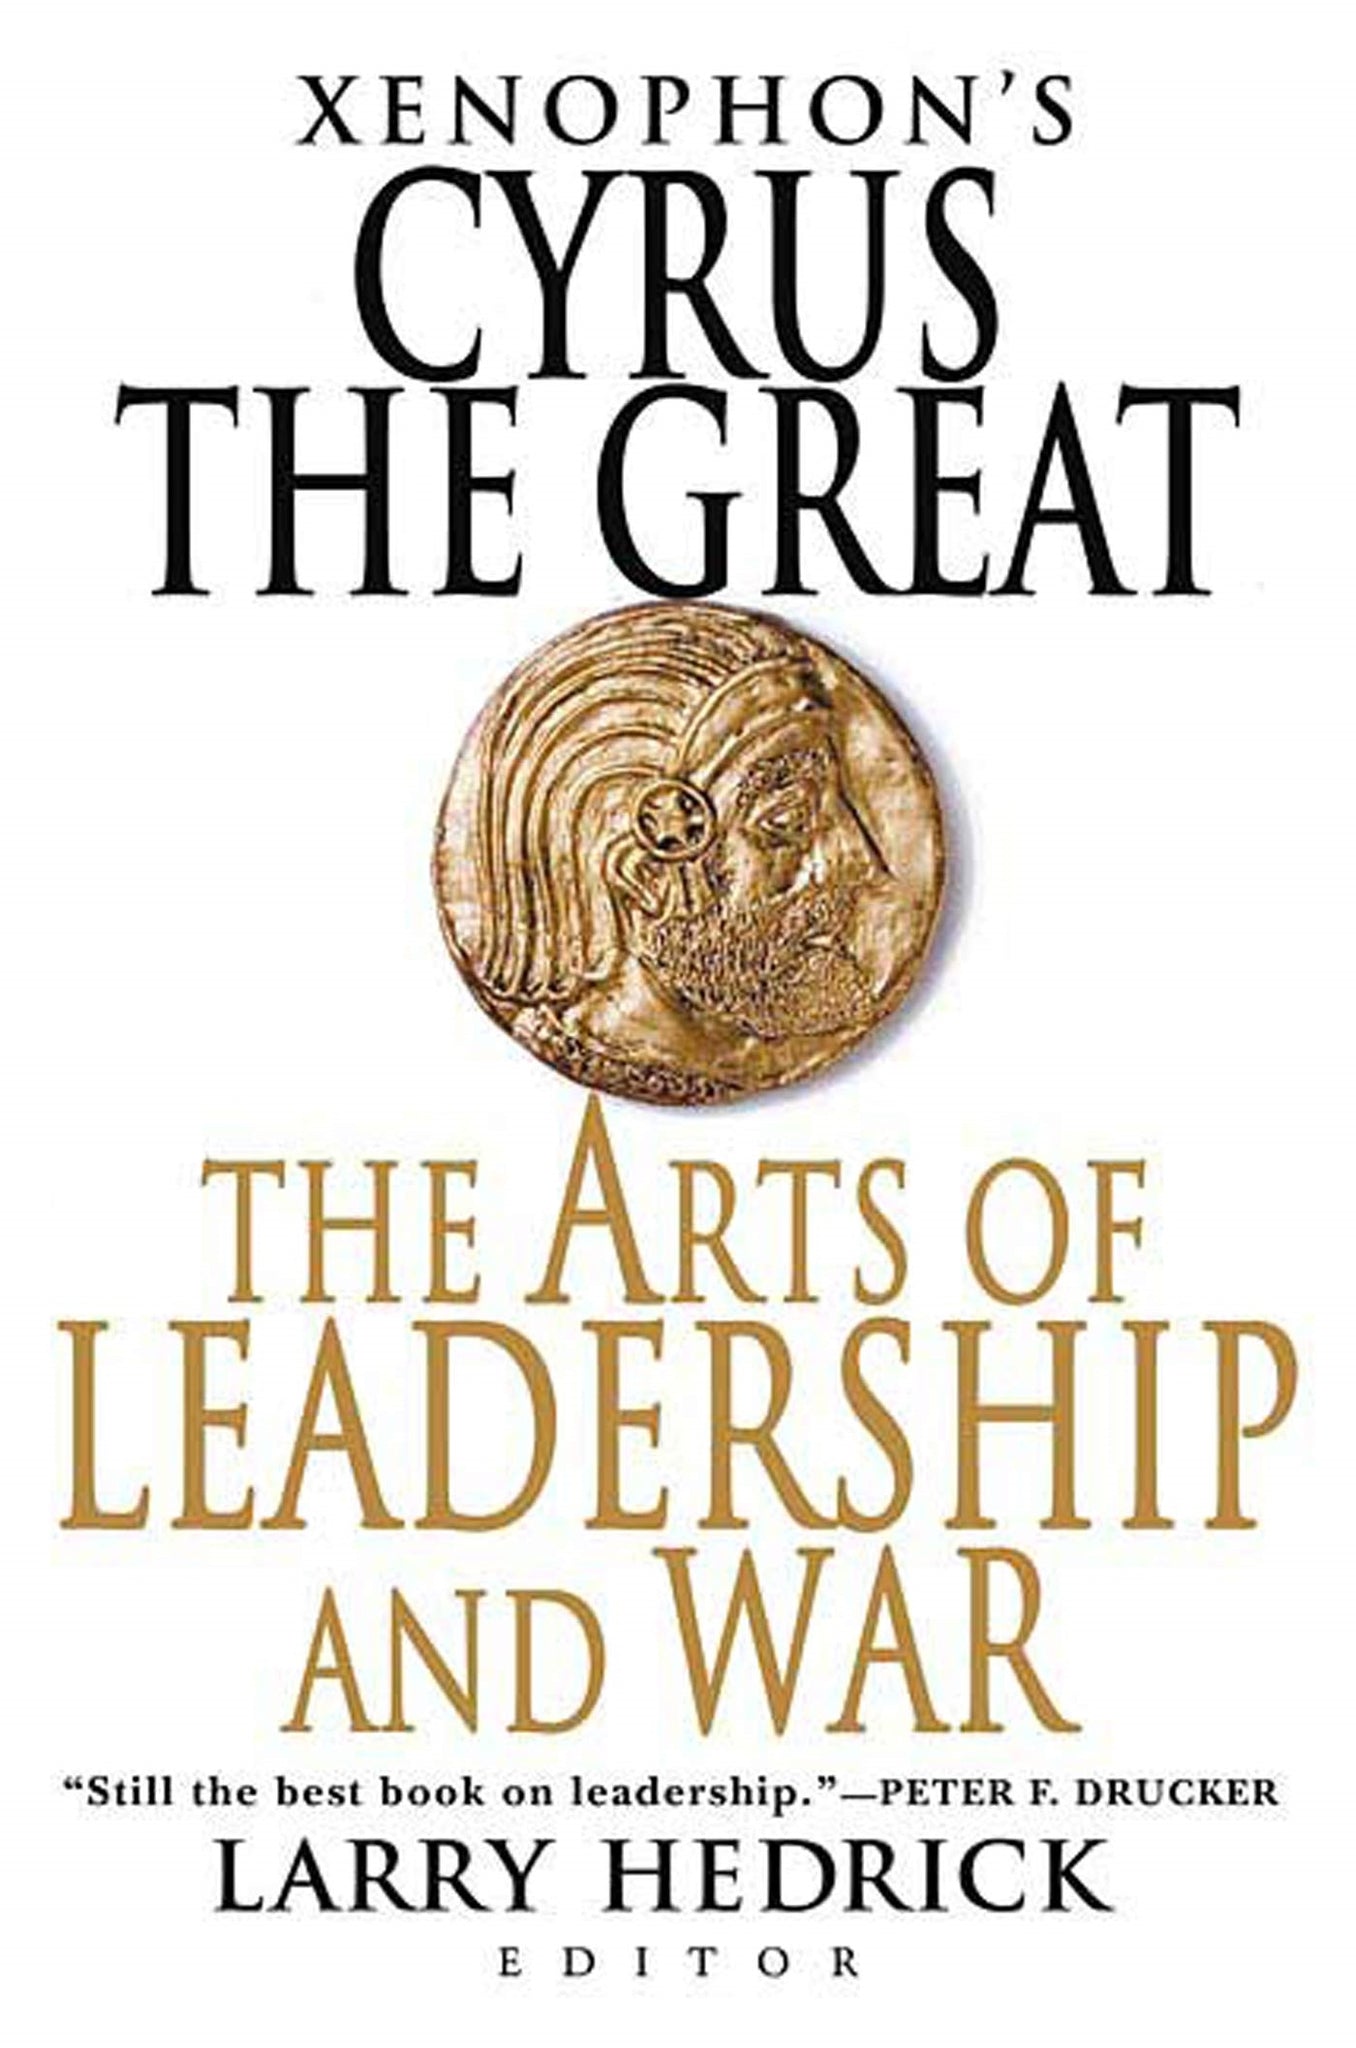 Xenophon's Cyrus the Great : The Arts of Leadership and War